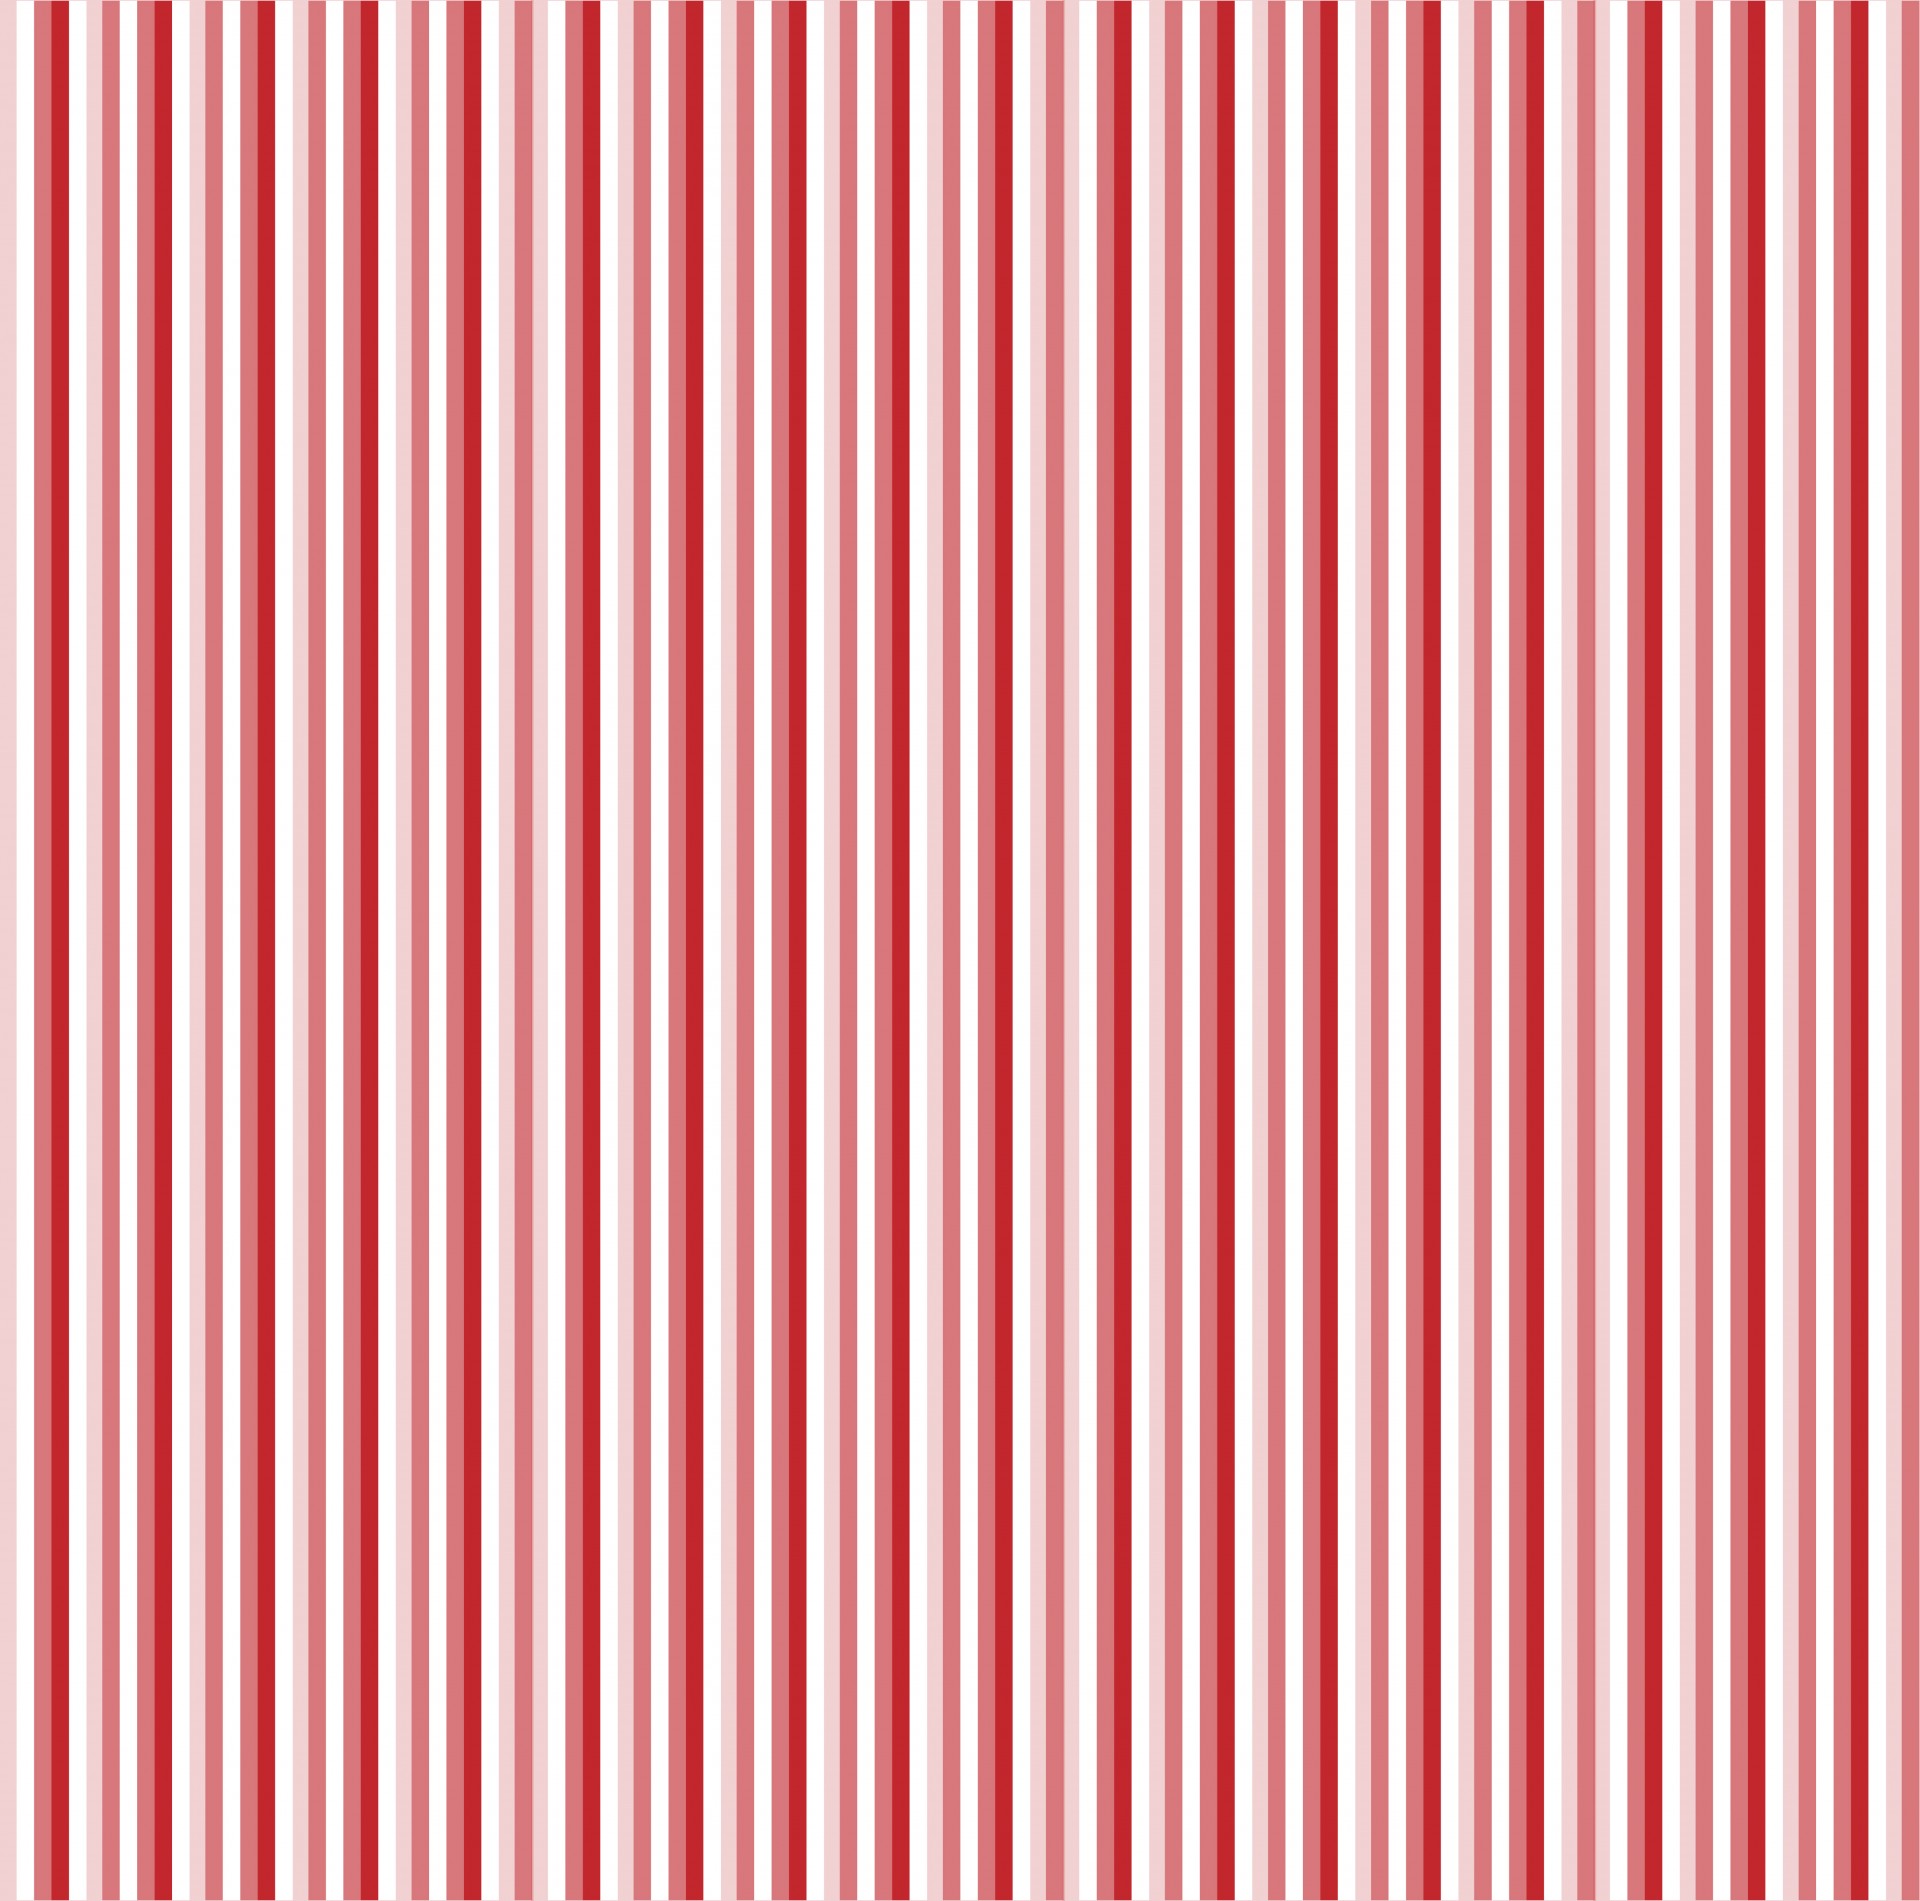 Stripe,stripes,red,white,background - free image from 